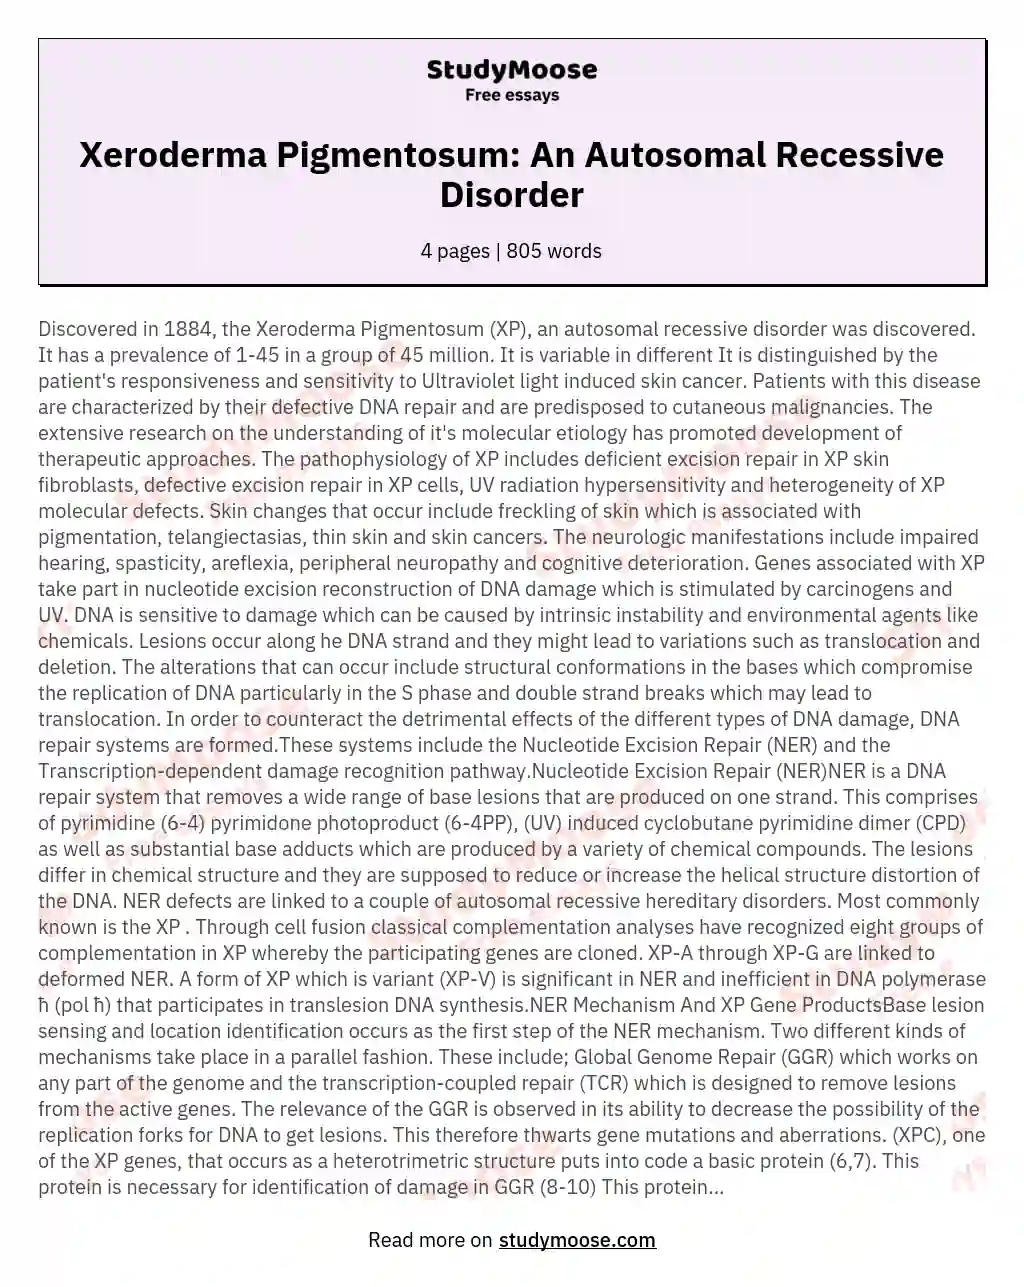 Discovered in 1884 the Xeroderma Pigmentosum XP an autosomal recessive disorder was